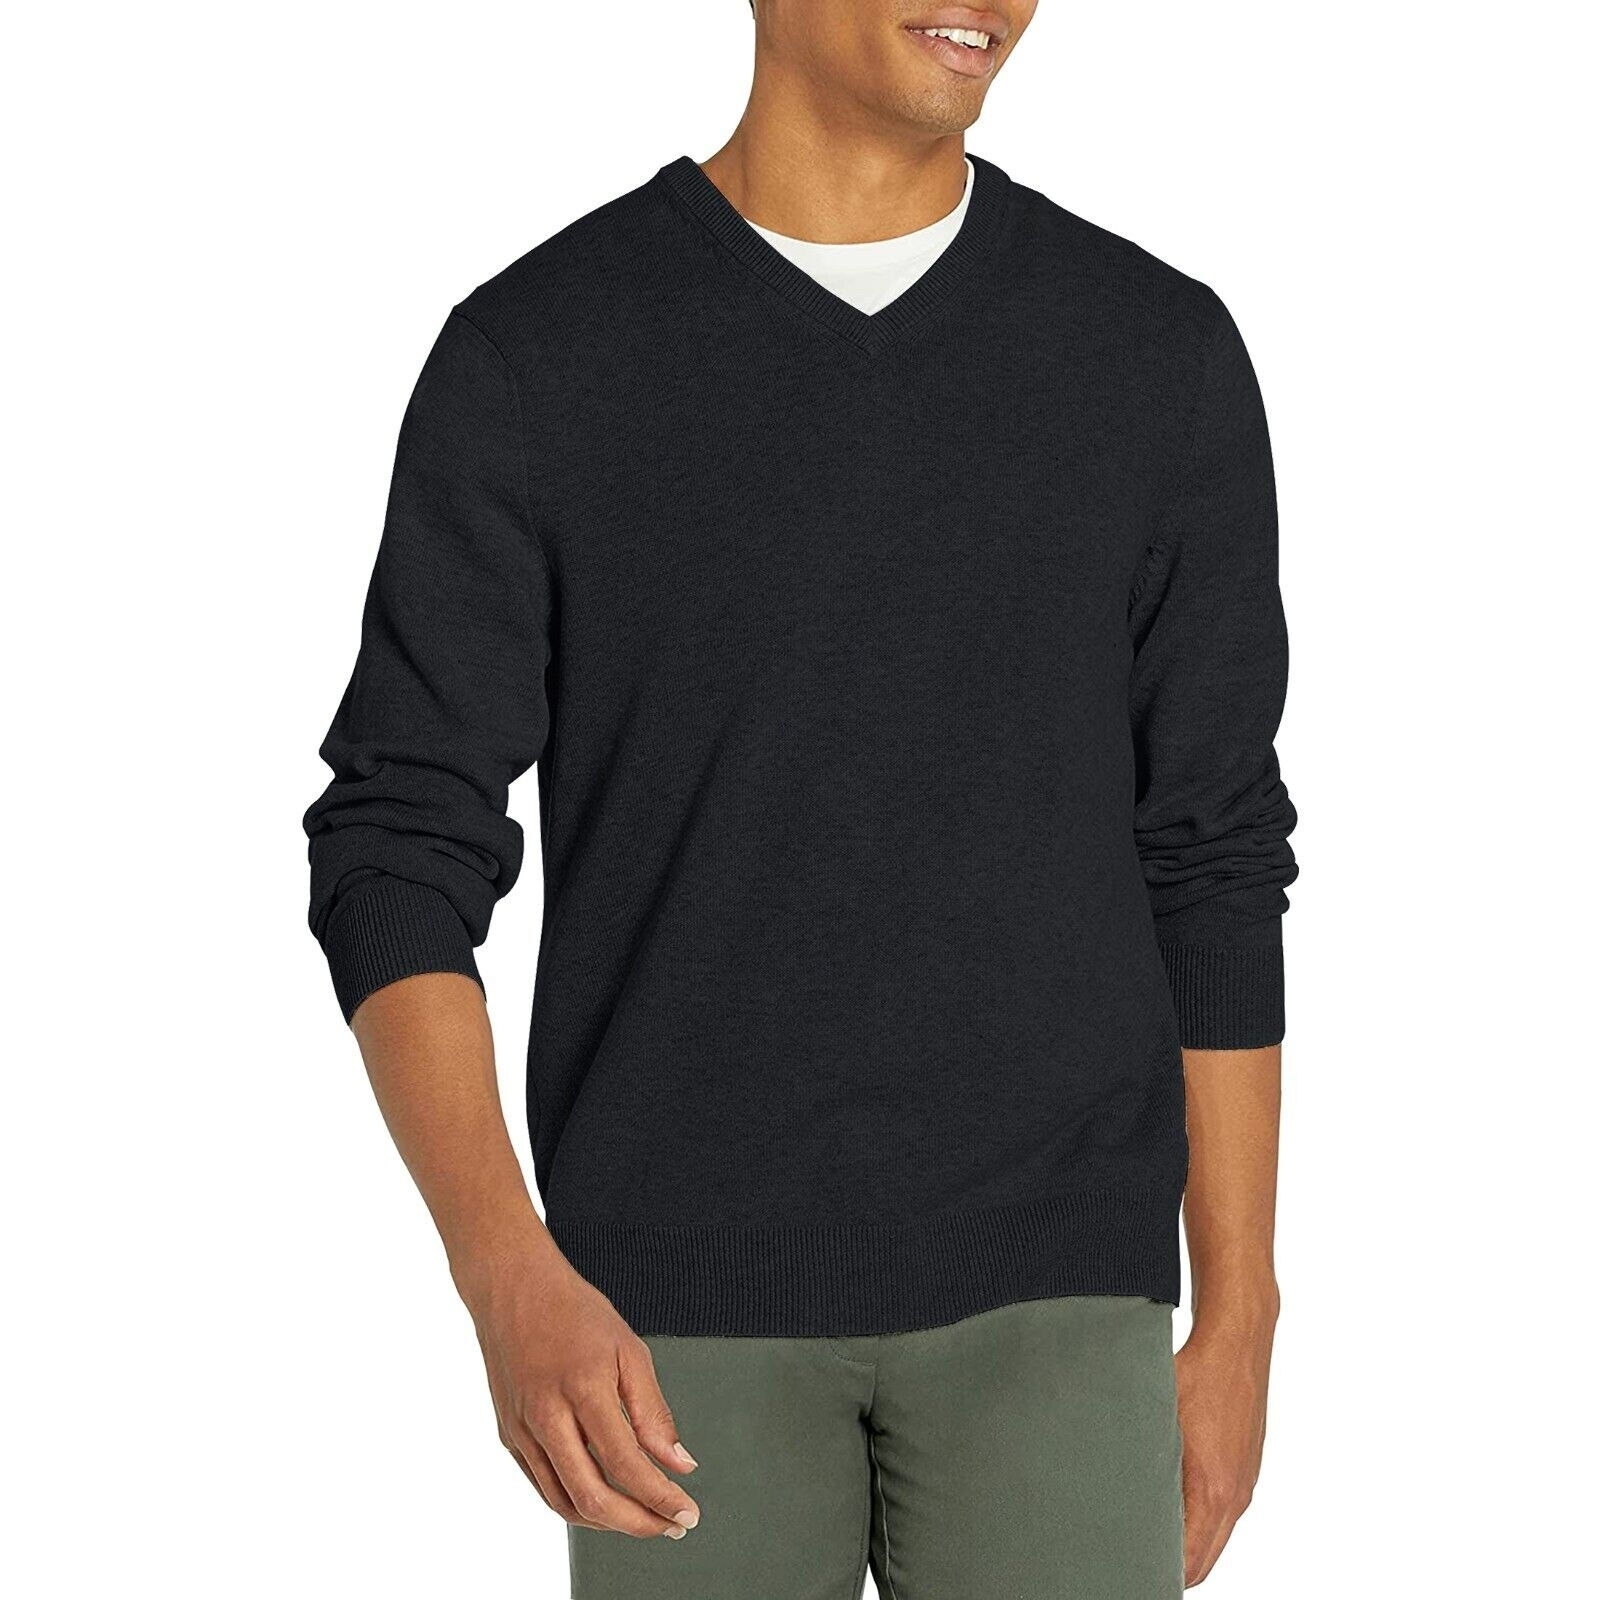 Men's Casual Ultra-Soft Slim Fit Warm Knit Pullover V-Neck Sweater For Winter - Black, Large